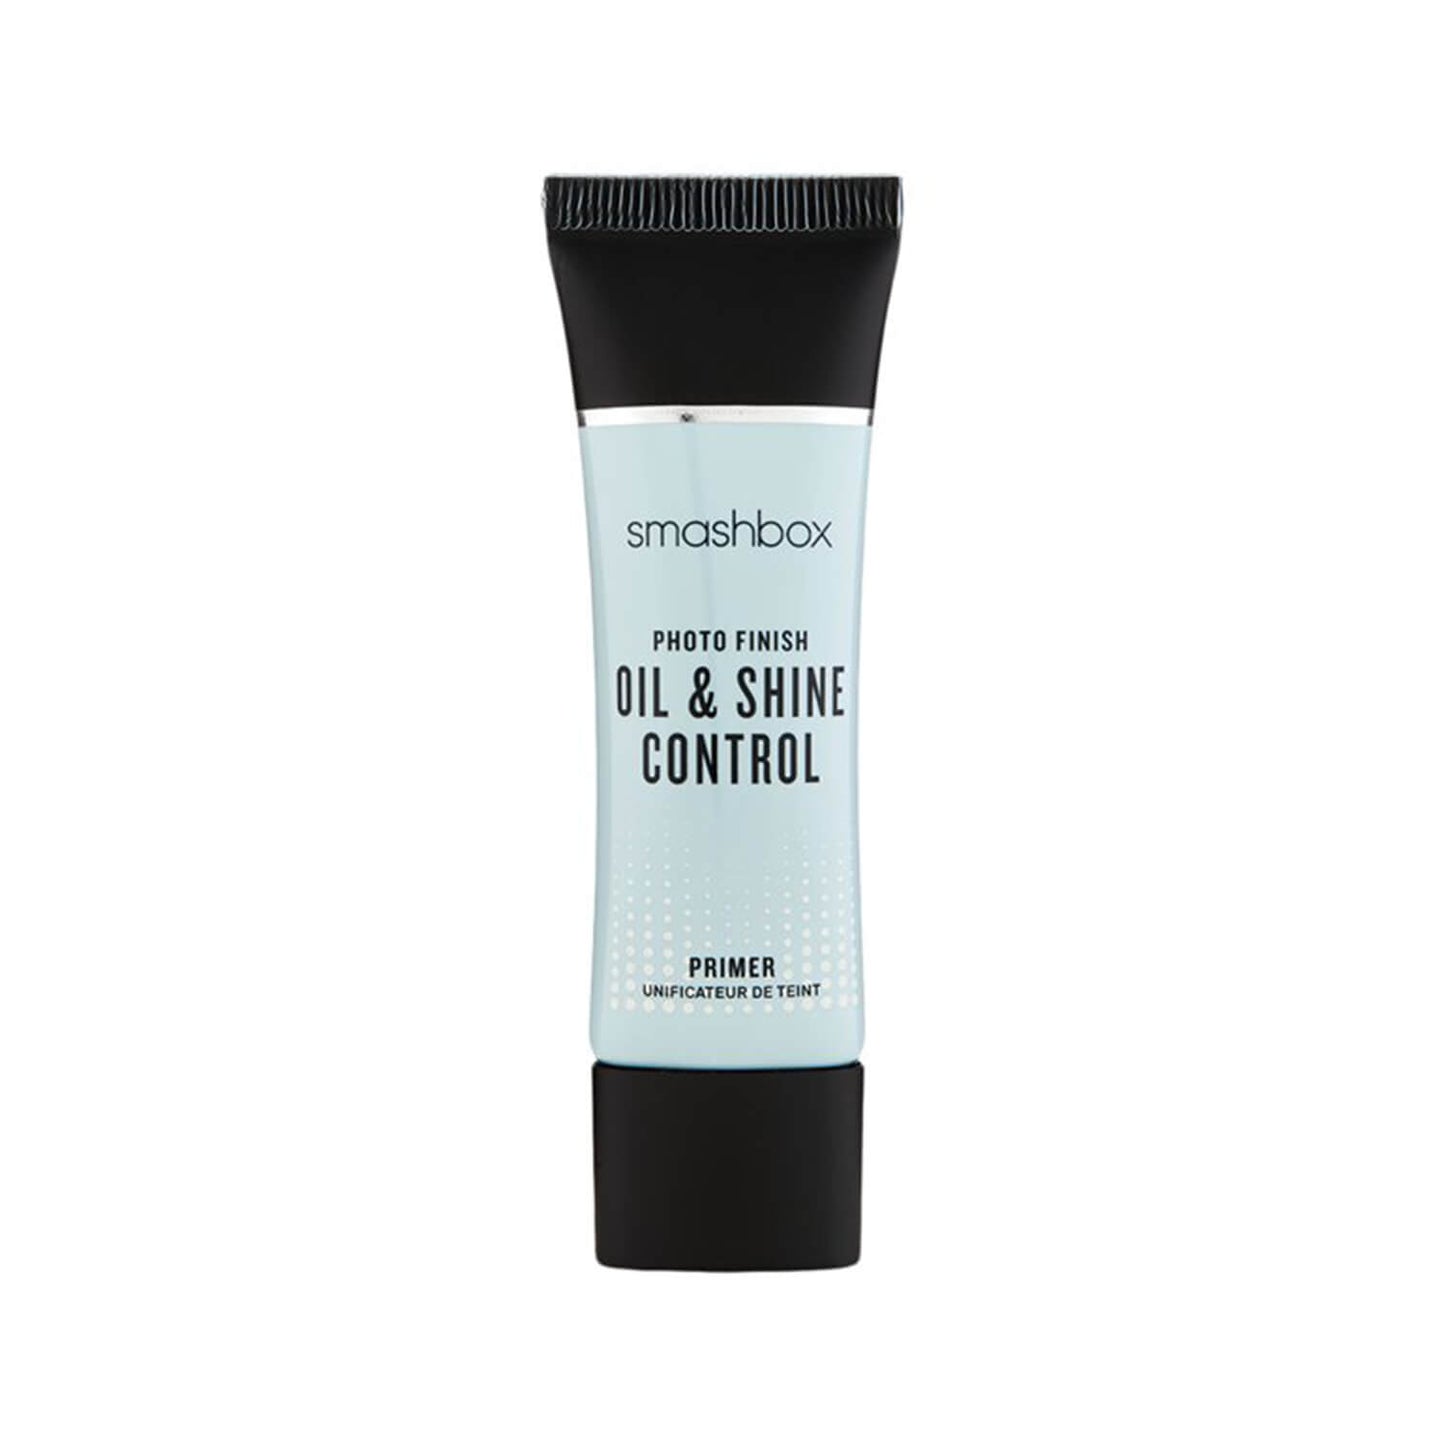 shop smashbox photo finish primer available at Heygirl.pk for delivery in Pakistan